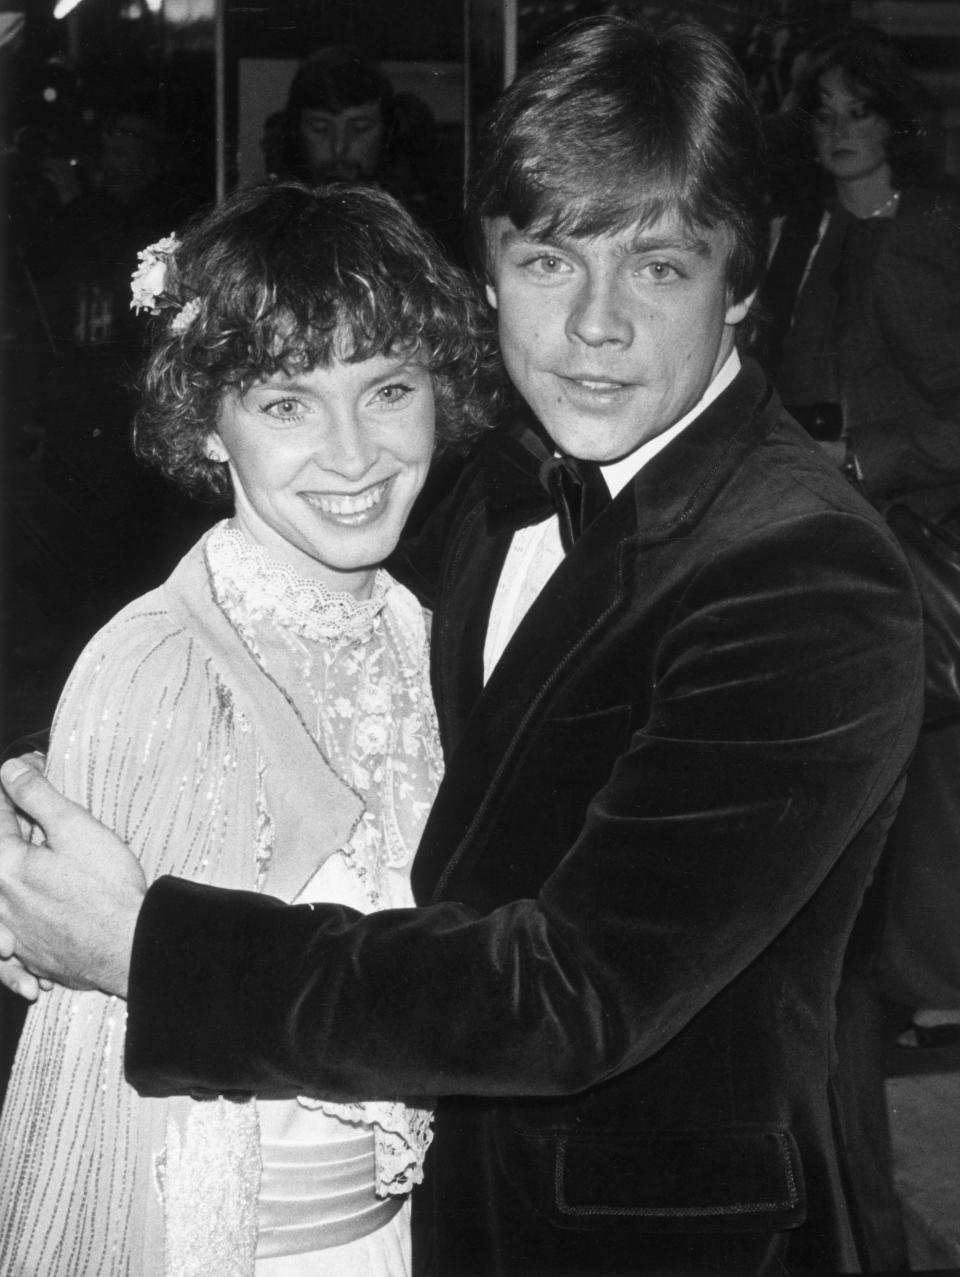 Actor Mark Hamill attends the royal premiere of "The Empire Strikes Back" with his wife, Mary Lou, on May 21, 1983.&nbsp;